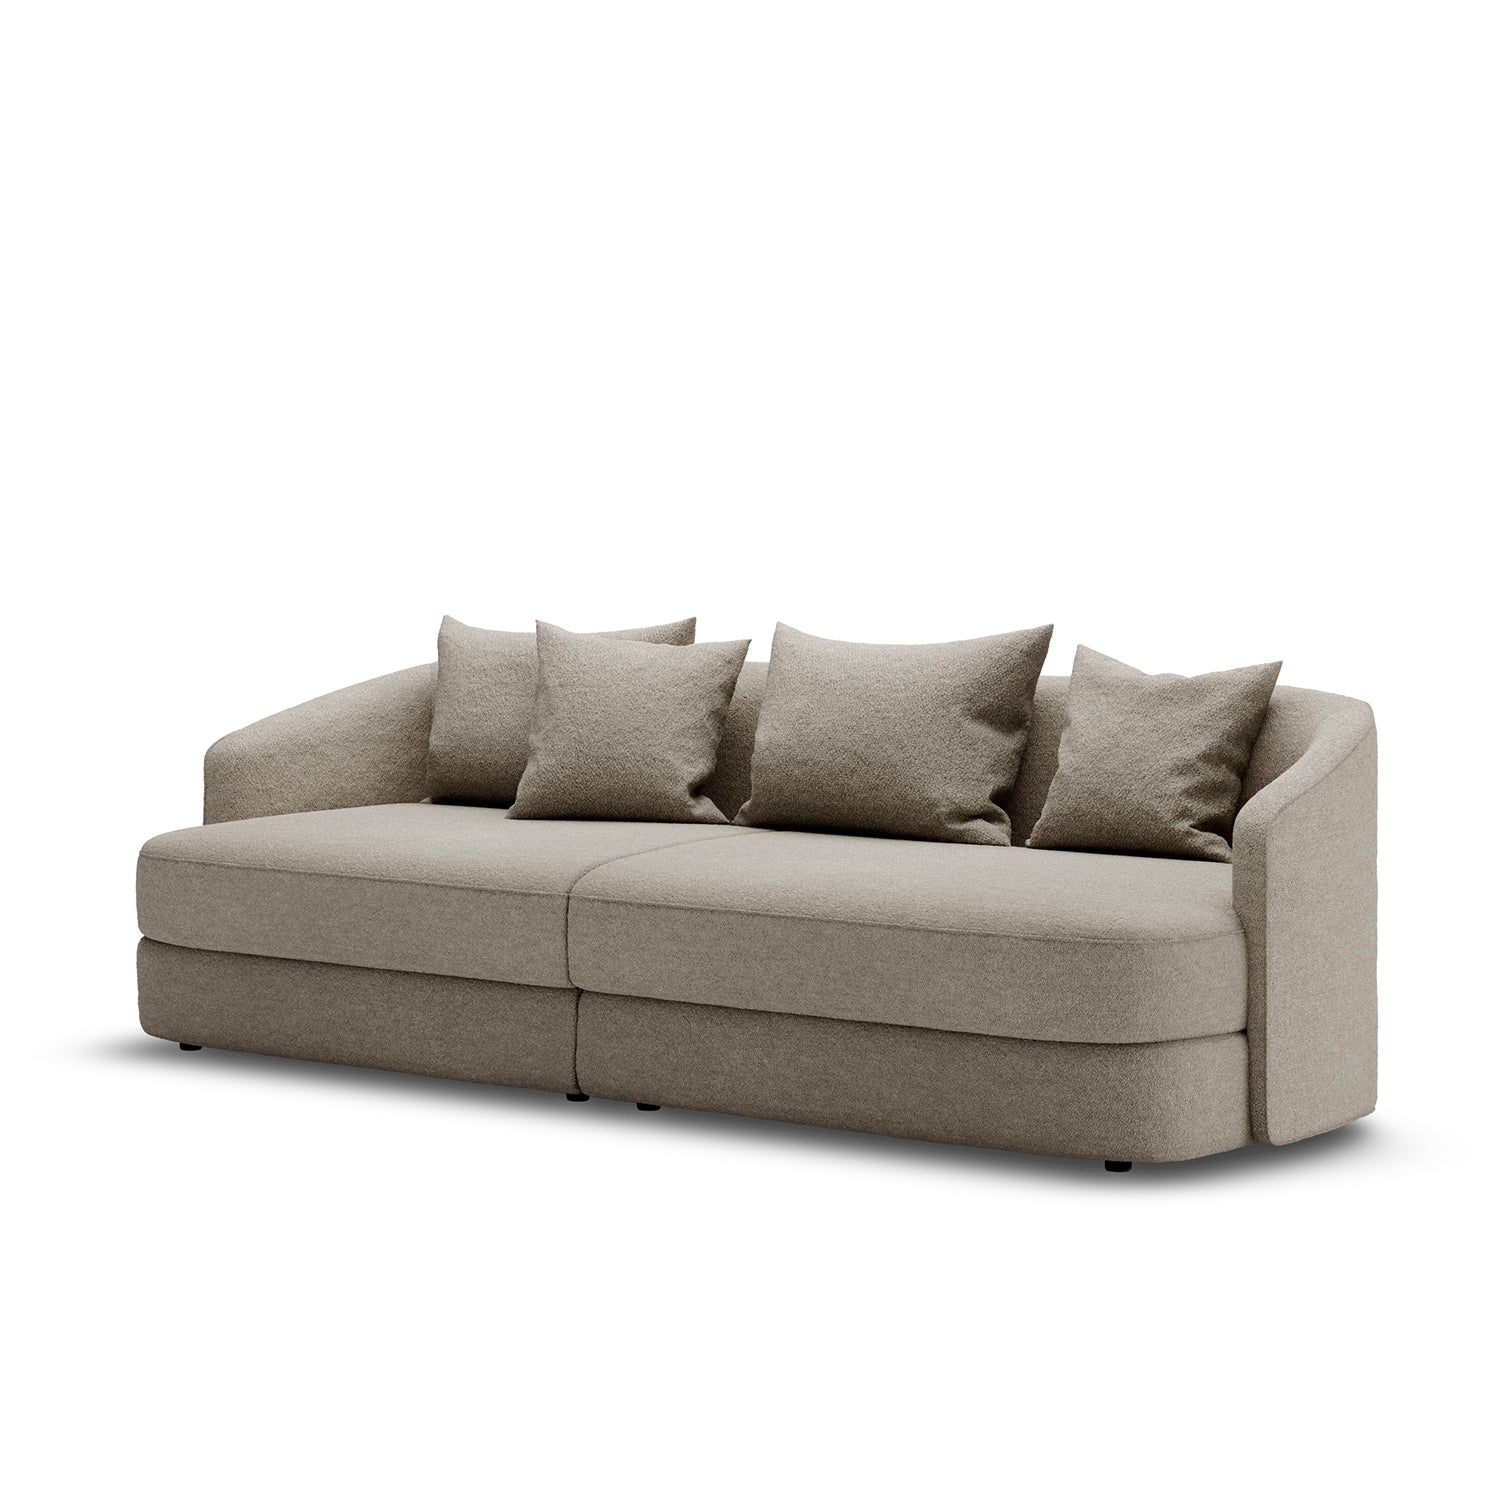 Covent Residential Sofa - The Design Choice